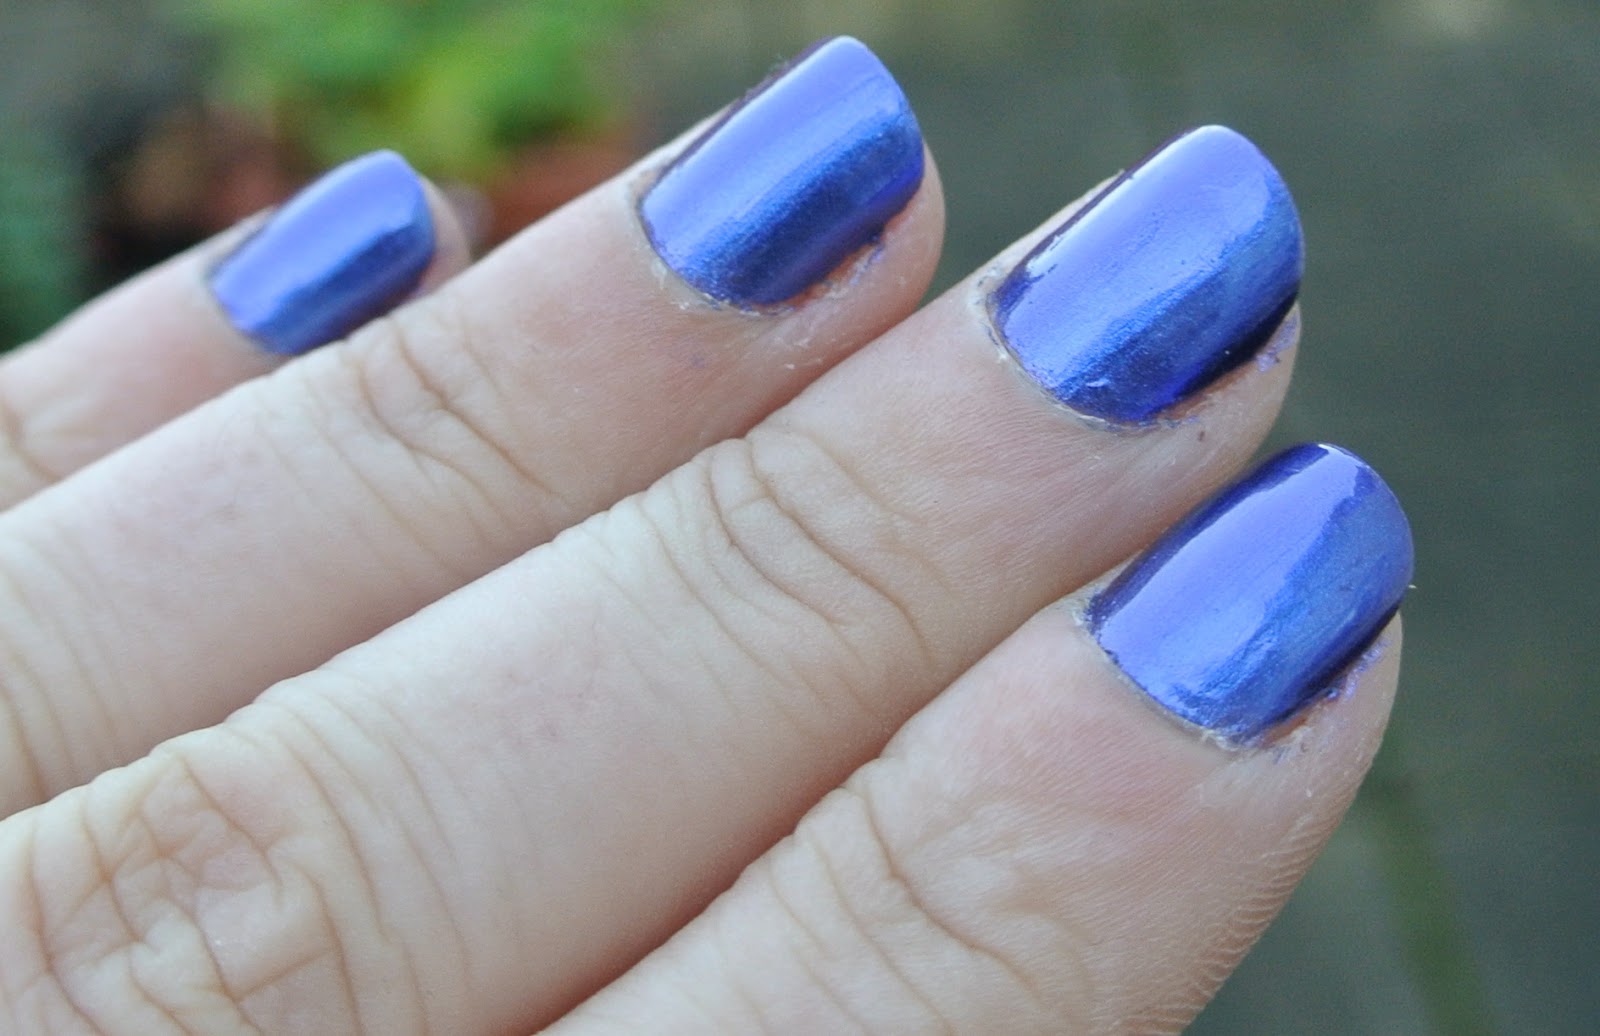 I love the metallic tint to it, nails inc. say it is: